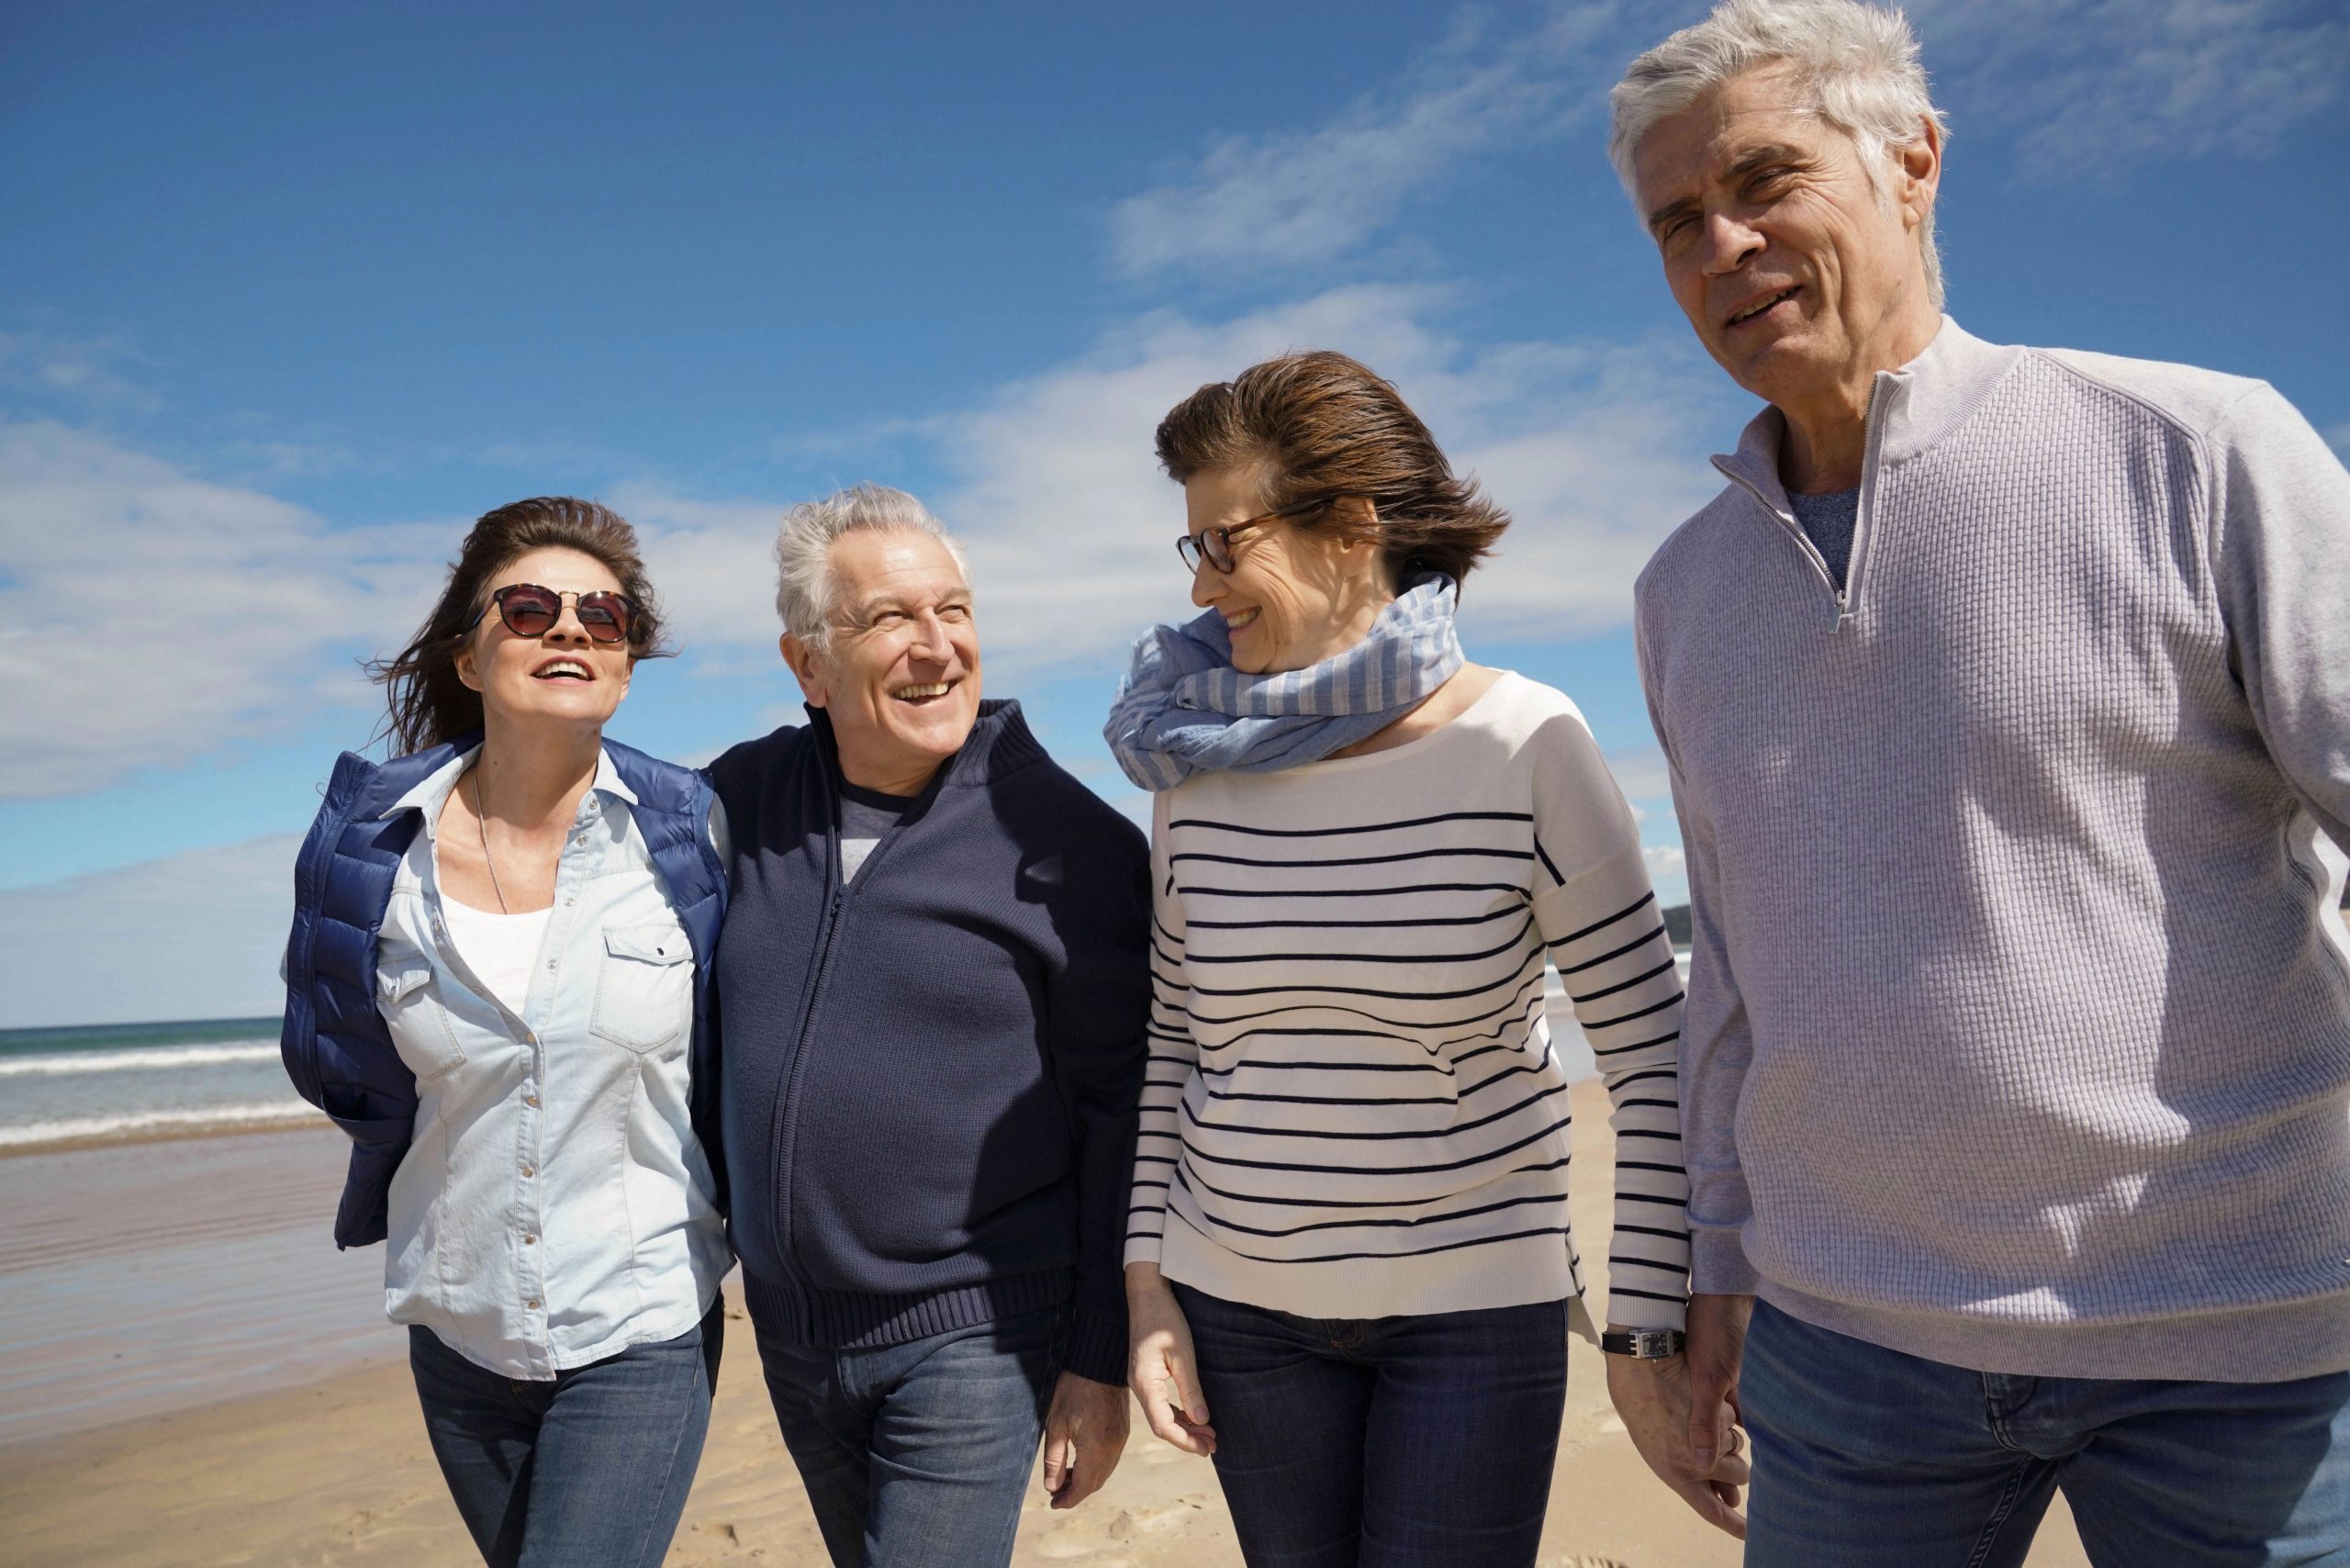 Group of senior people walking together on the beach